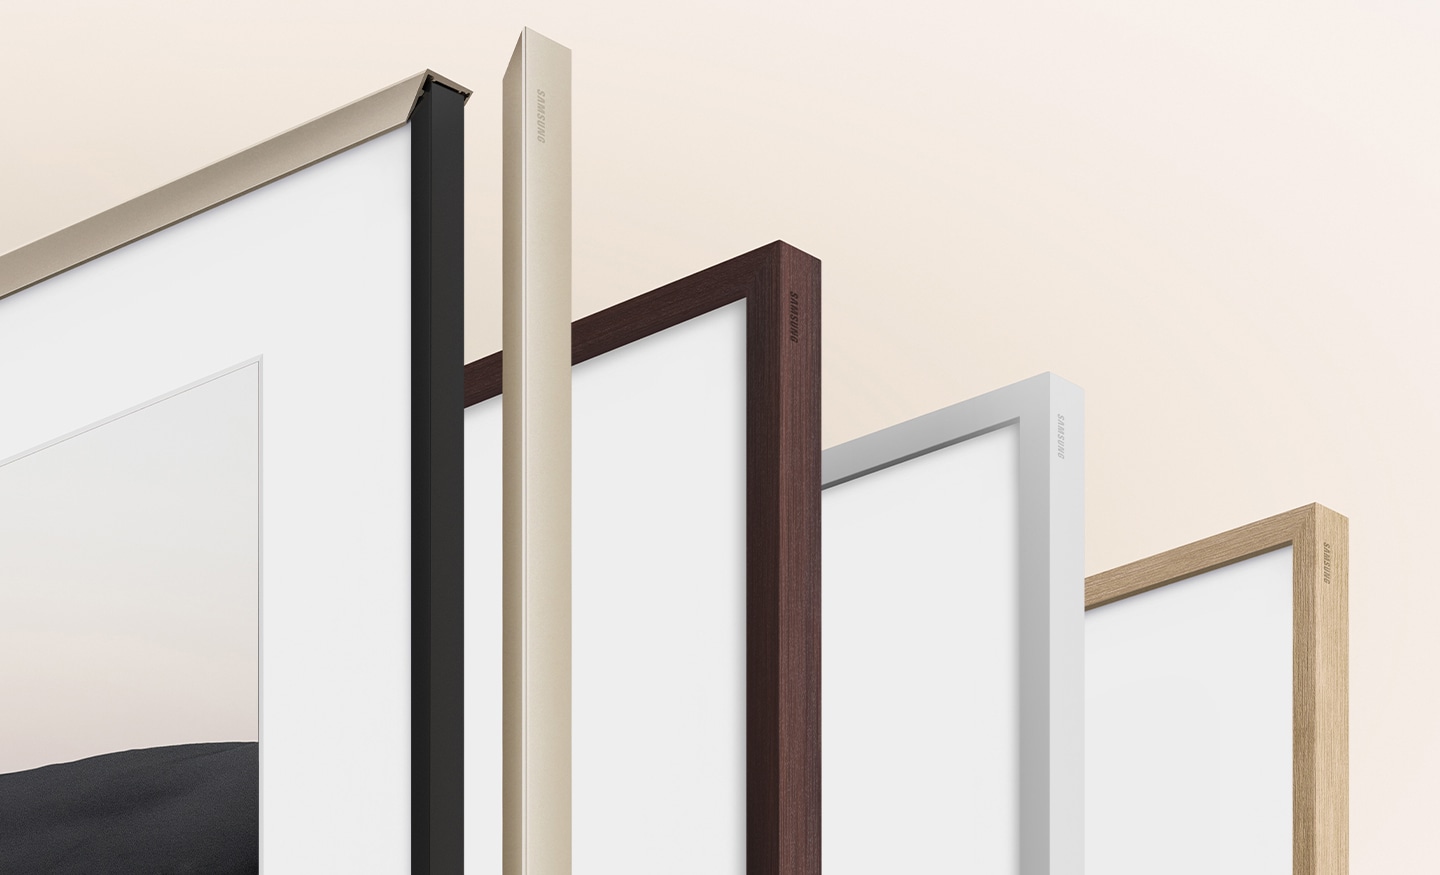 A variety of The Frame's customizable bezels are displayed.